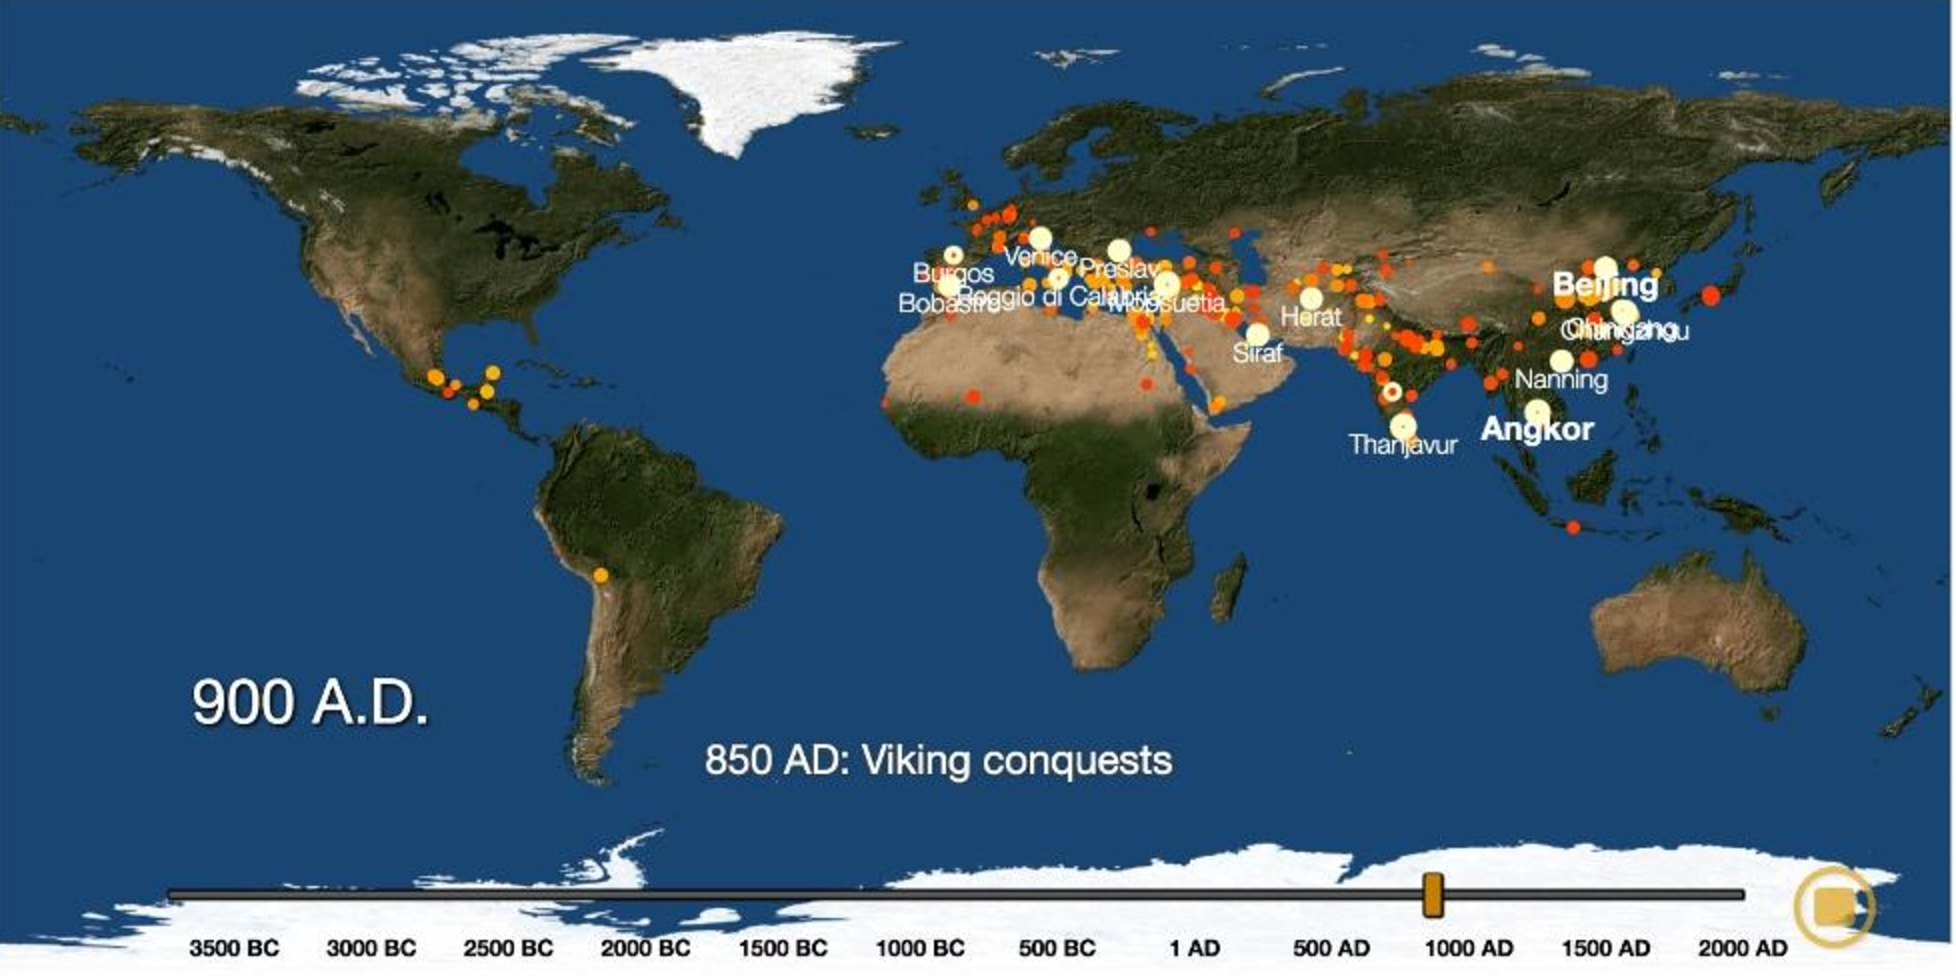 Timelapse Animation Lets You See the Rise of Cities Across the Globe, from 3700 BC to 2000 AD